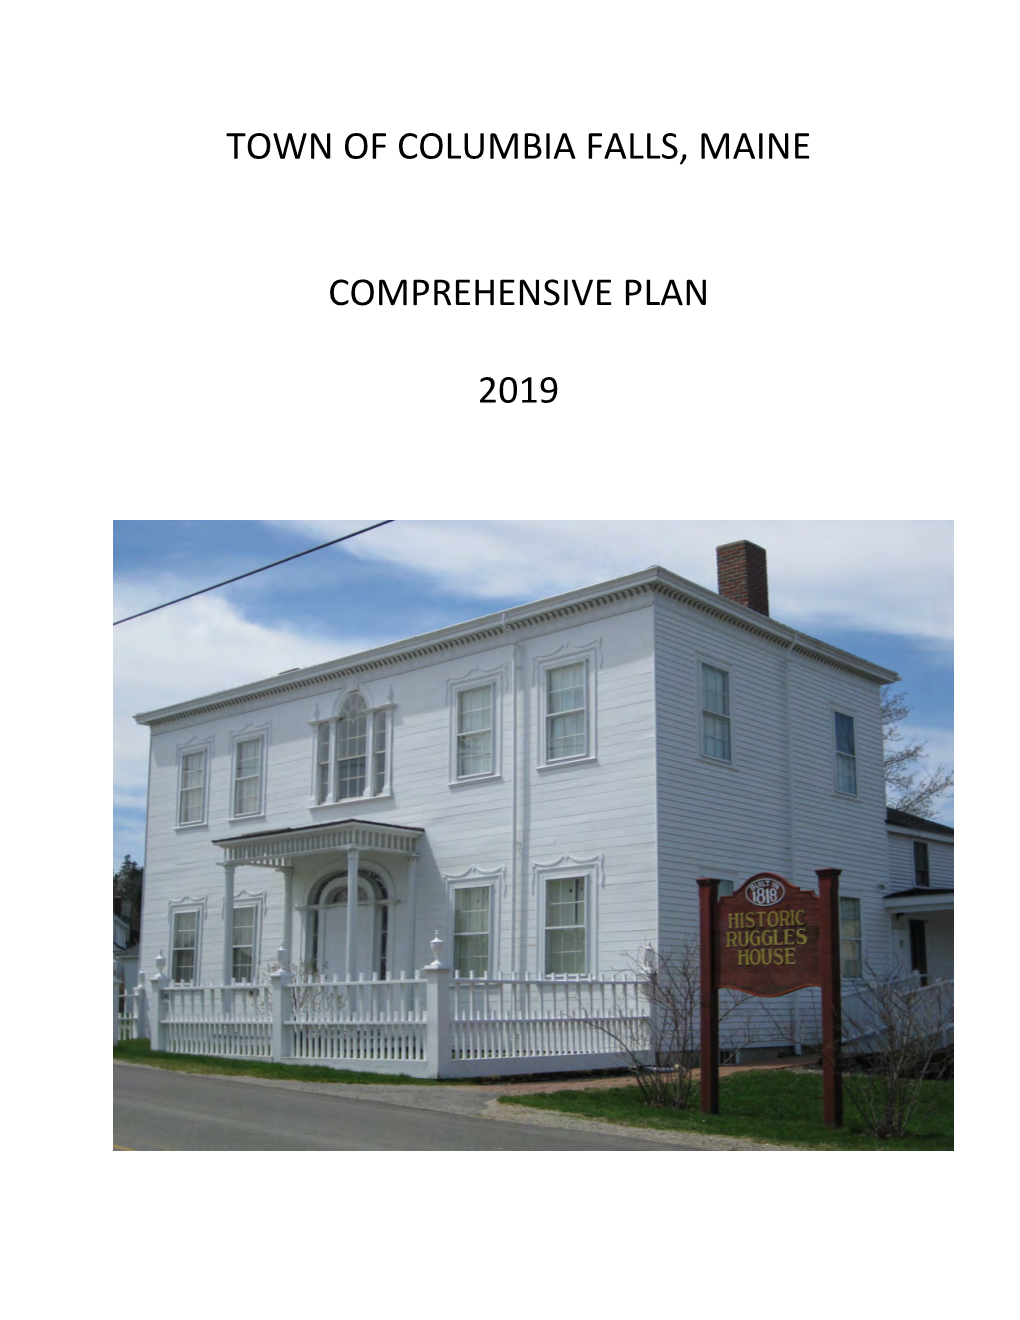 Town of Columbia Falls, Maine Comprehensive Plan 2019